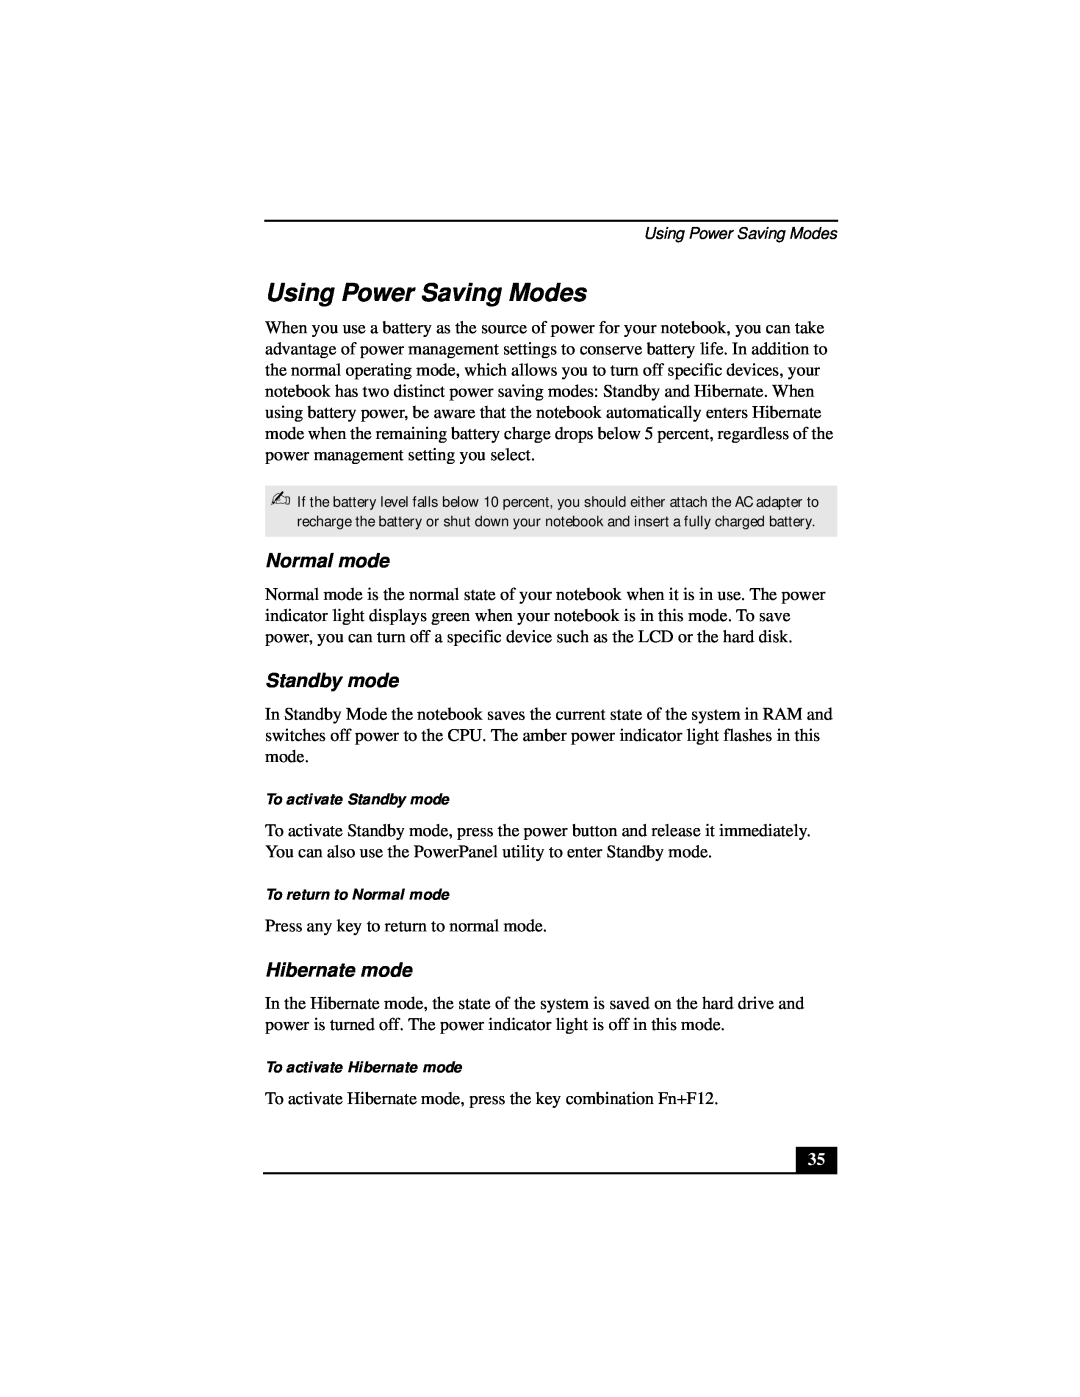 Sony Notebook Computer manual Using Power Saving Modes, Normal mode, Hibernate mode, To activate Standby mode 